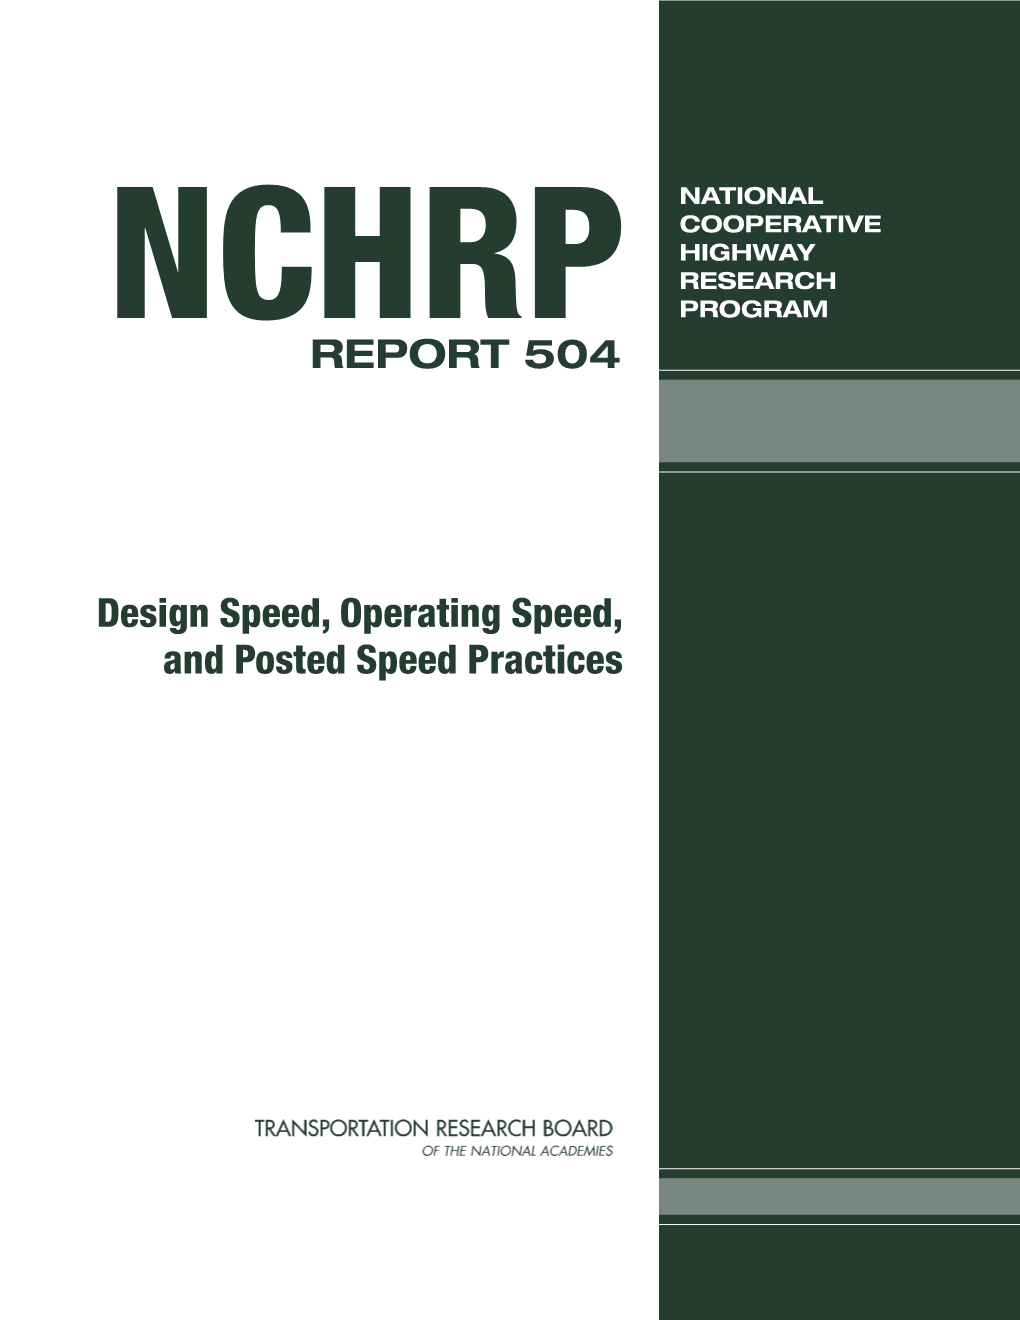 NCHRP Report 504 – Design Speed, Operating Speed, and Posted